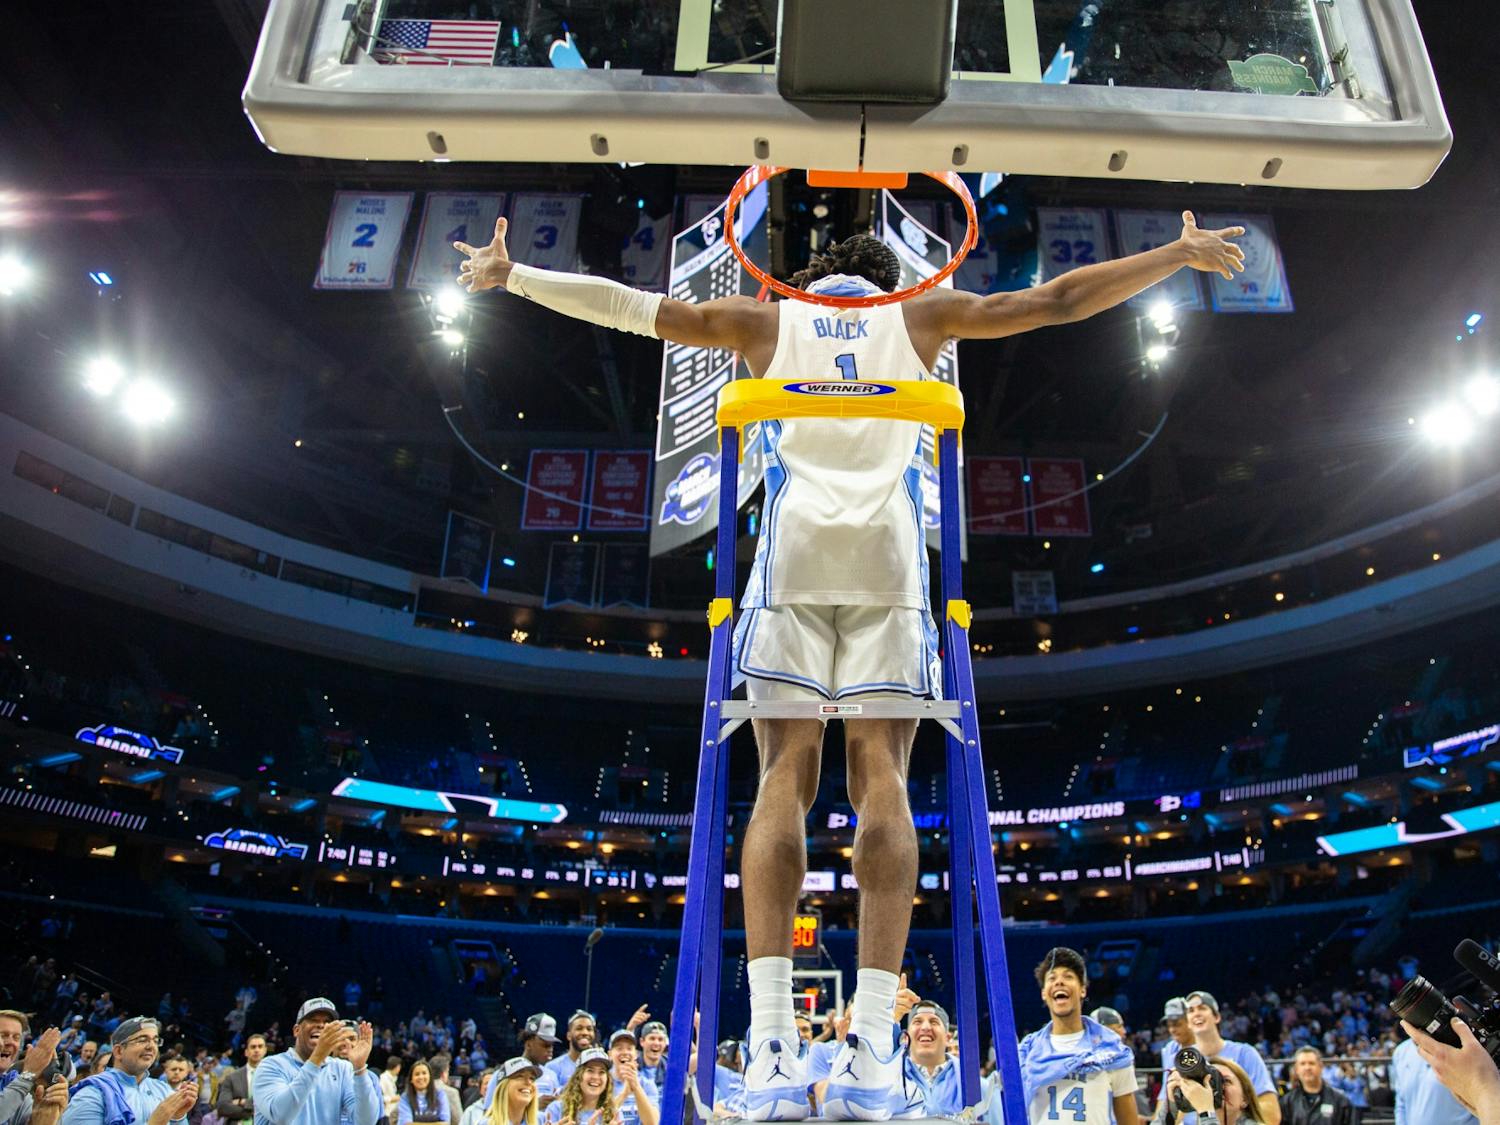 Senior forward Leaky Black (1) climbs the ladder after winning the Elite 8 game against St. Peter's at the Wells Fargo Center in Philadelphia on March 27, 2022. UNC is advancing to the Final Four.&nbsp;